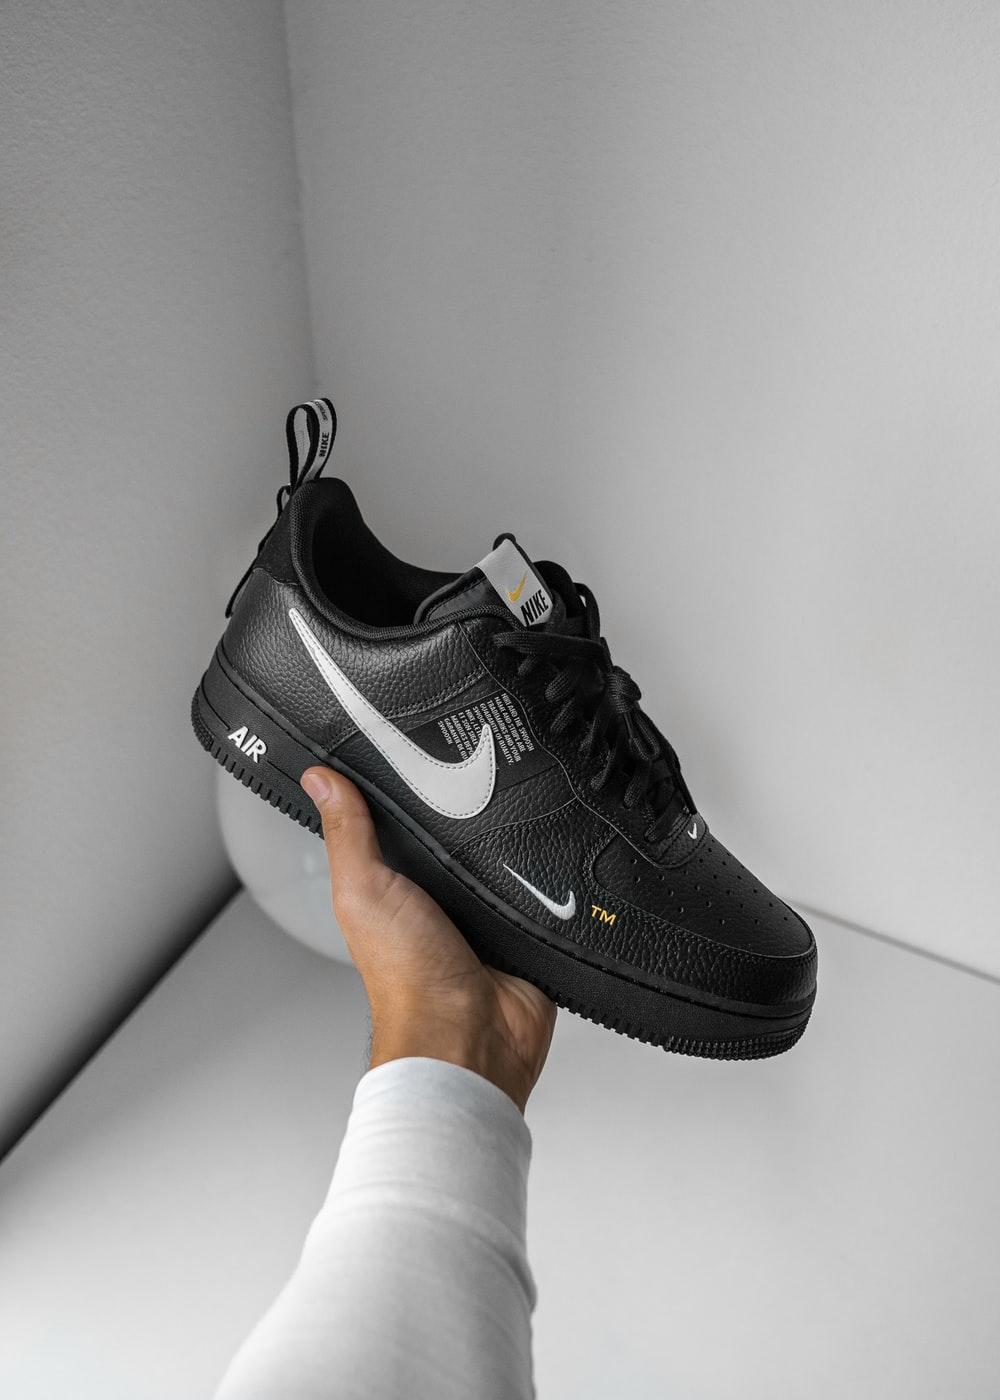 black and white Nike Air Force 1 sneaker photo